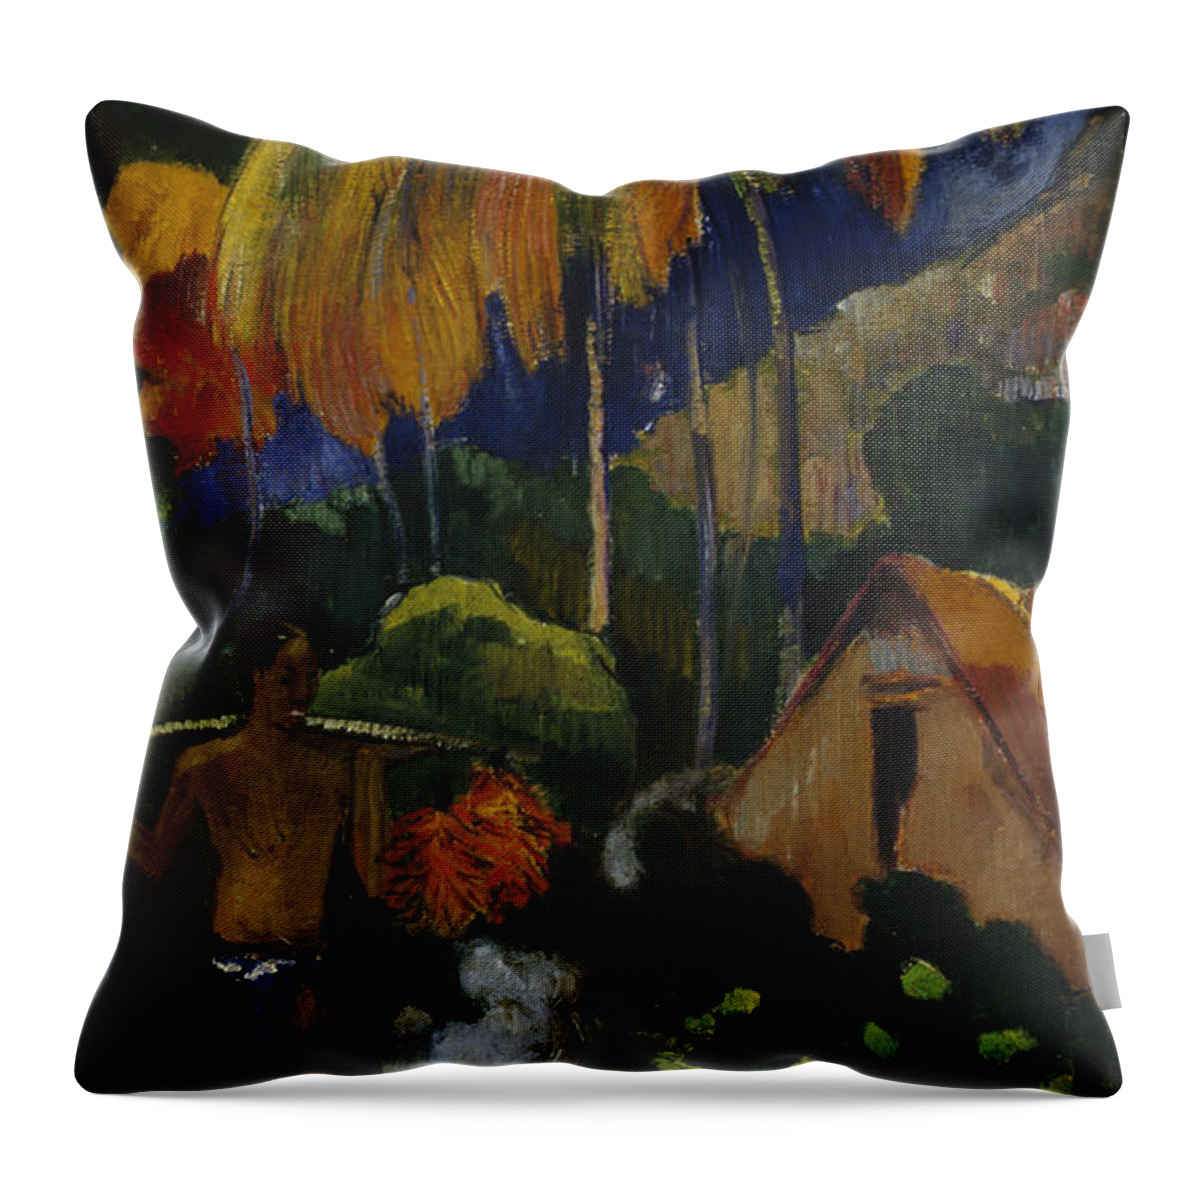 Paul Gauguin Throw Pillow featuring the painting Landscape In Tahiti #1 by Paul Gauguin